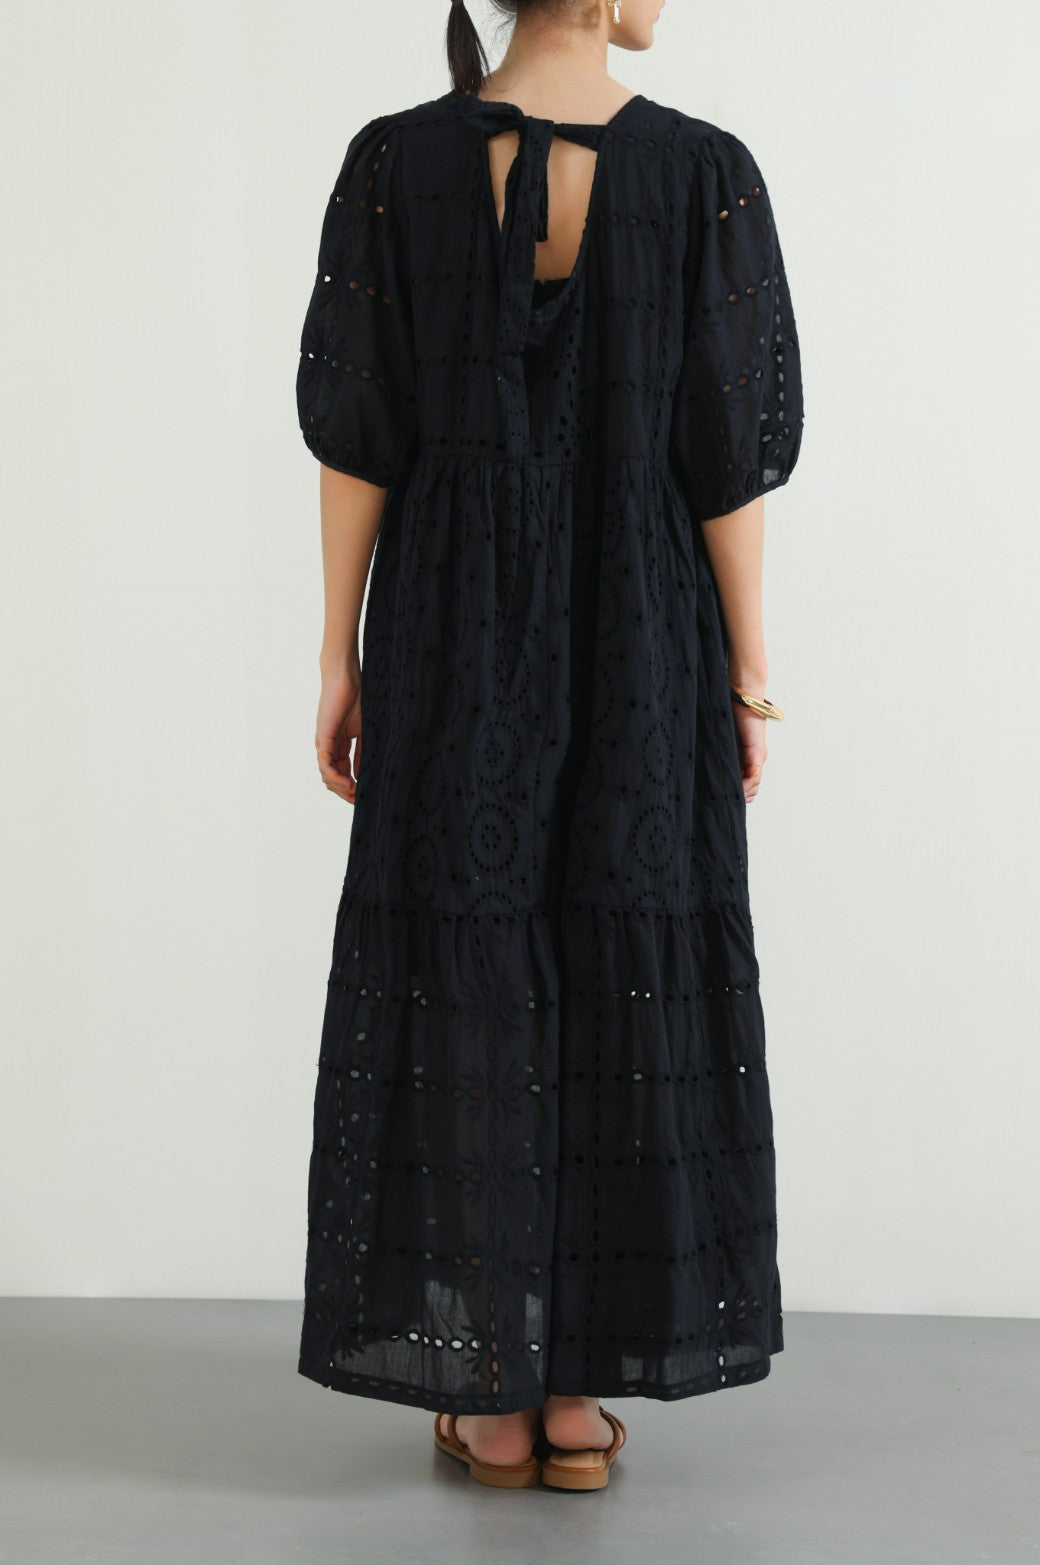 BLACK EMBROIDERED TIER DRESS